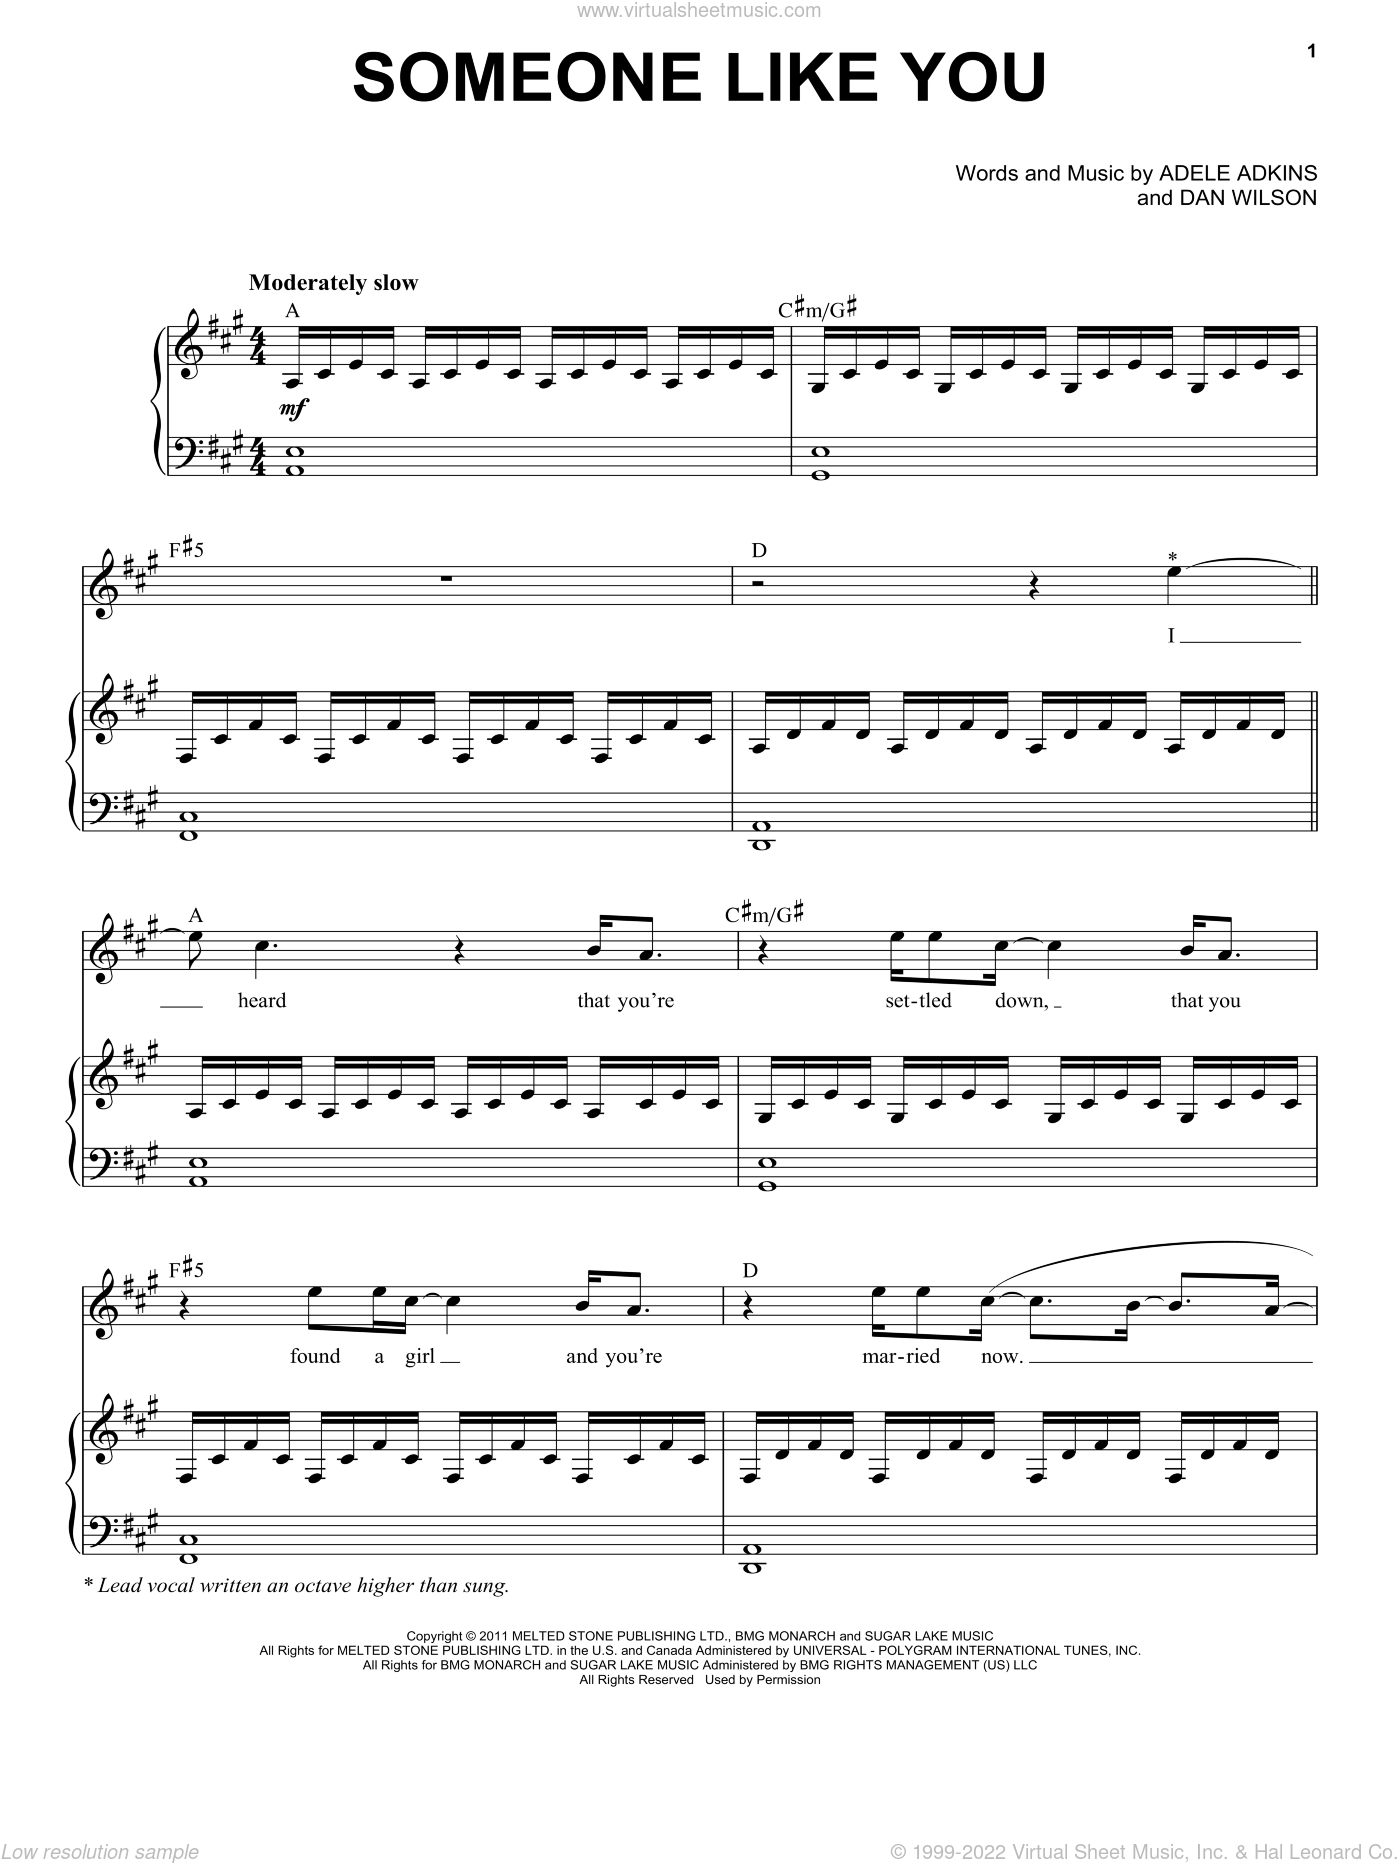 Adele - Someone Like You sheet music for voice and piano [PDF]